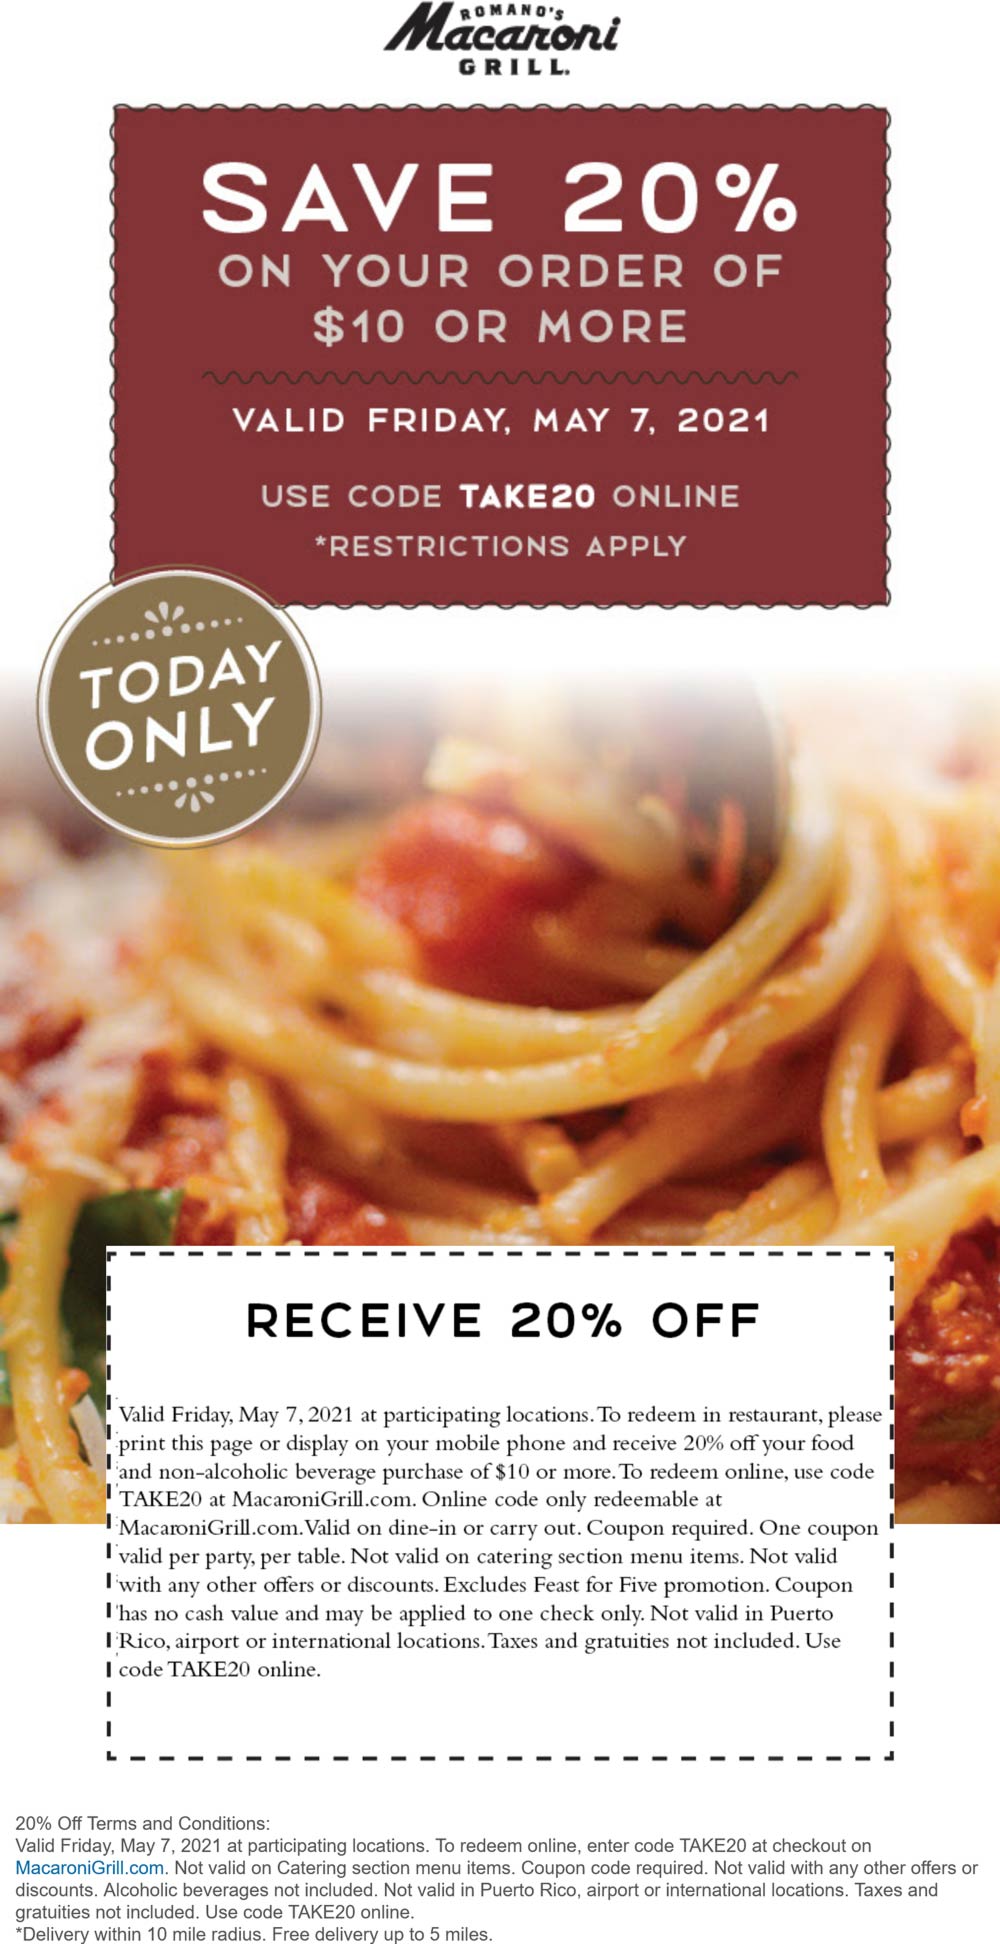 Macaroni Grill restaurants Coupon  20% off today at Macaroni Grill restaurants, or online via promo code TAKE20 #macaronigrill 